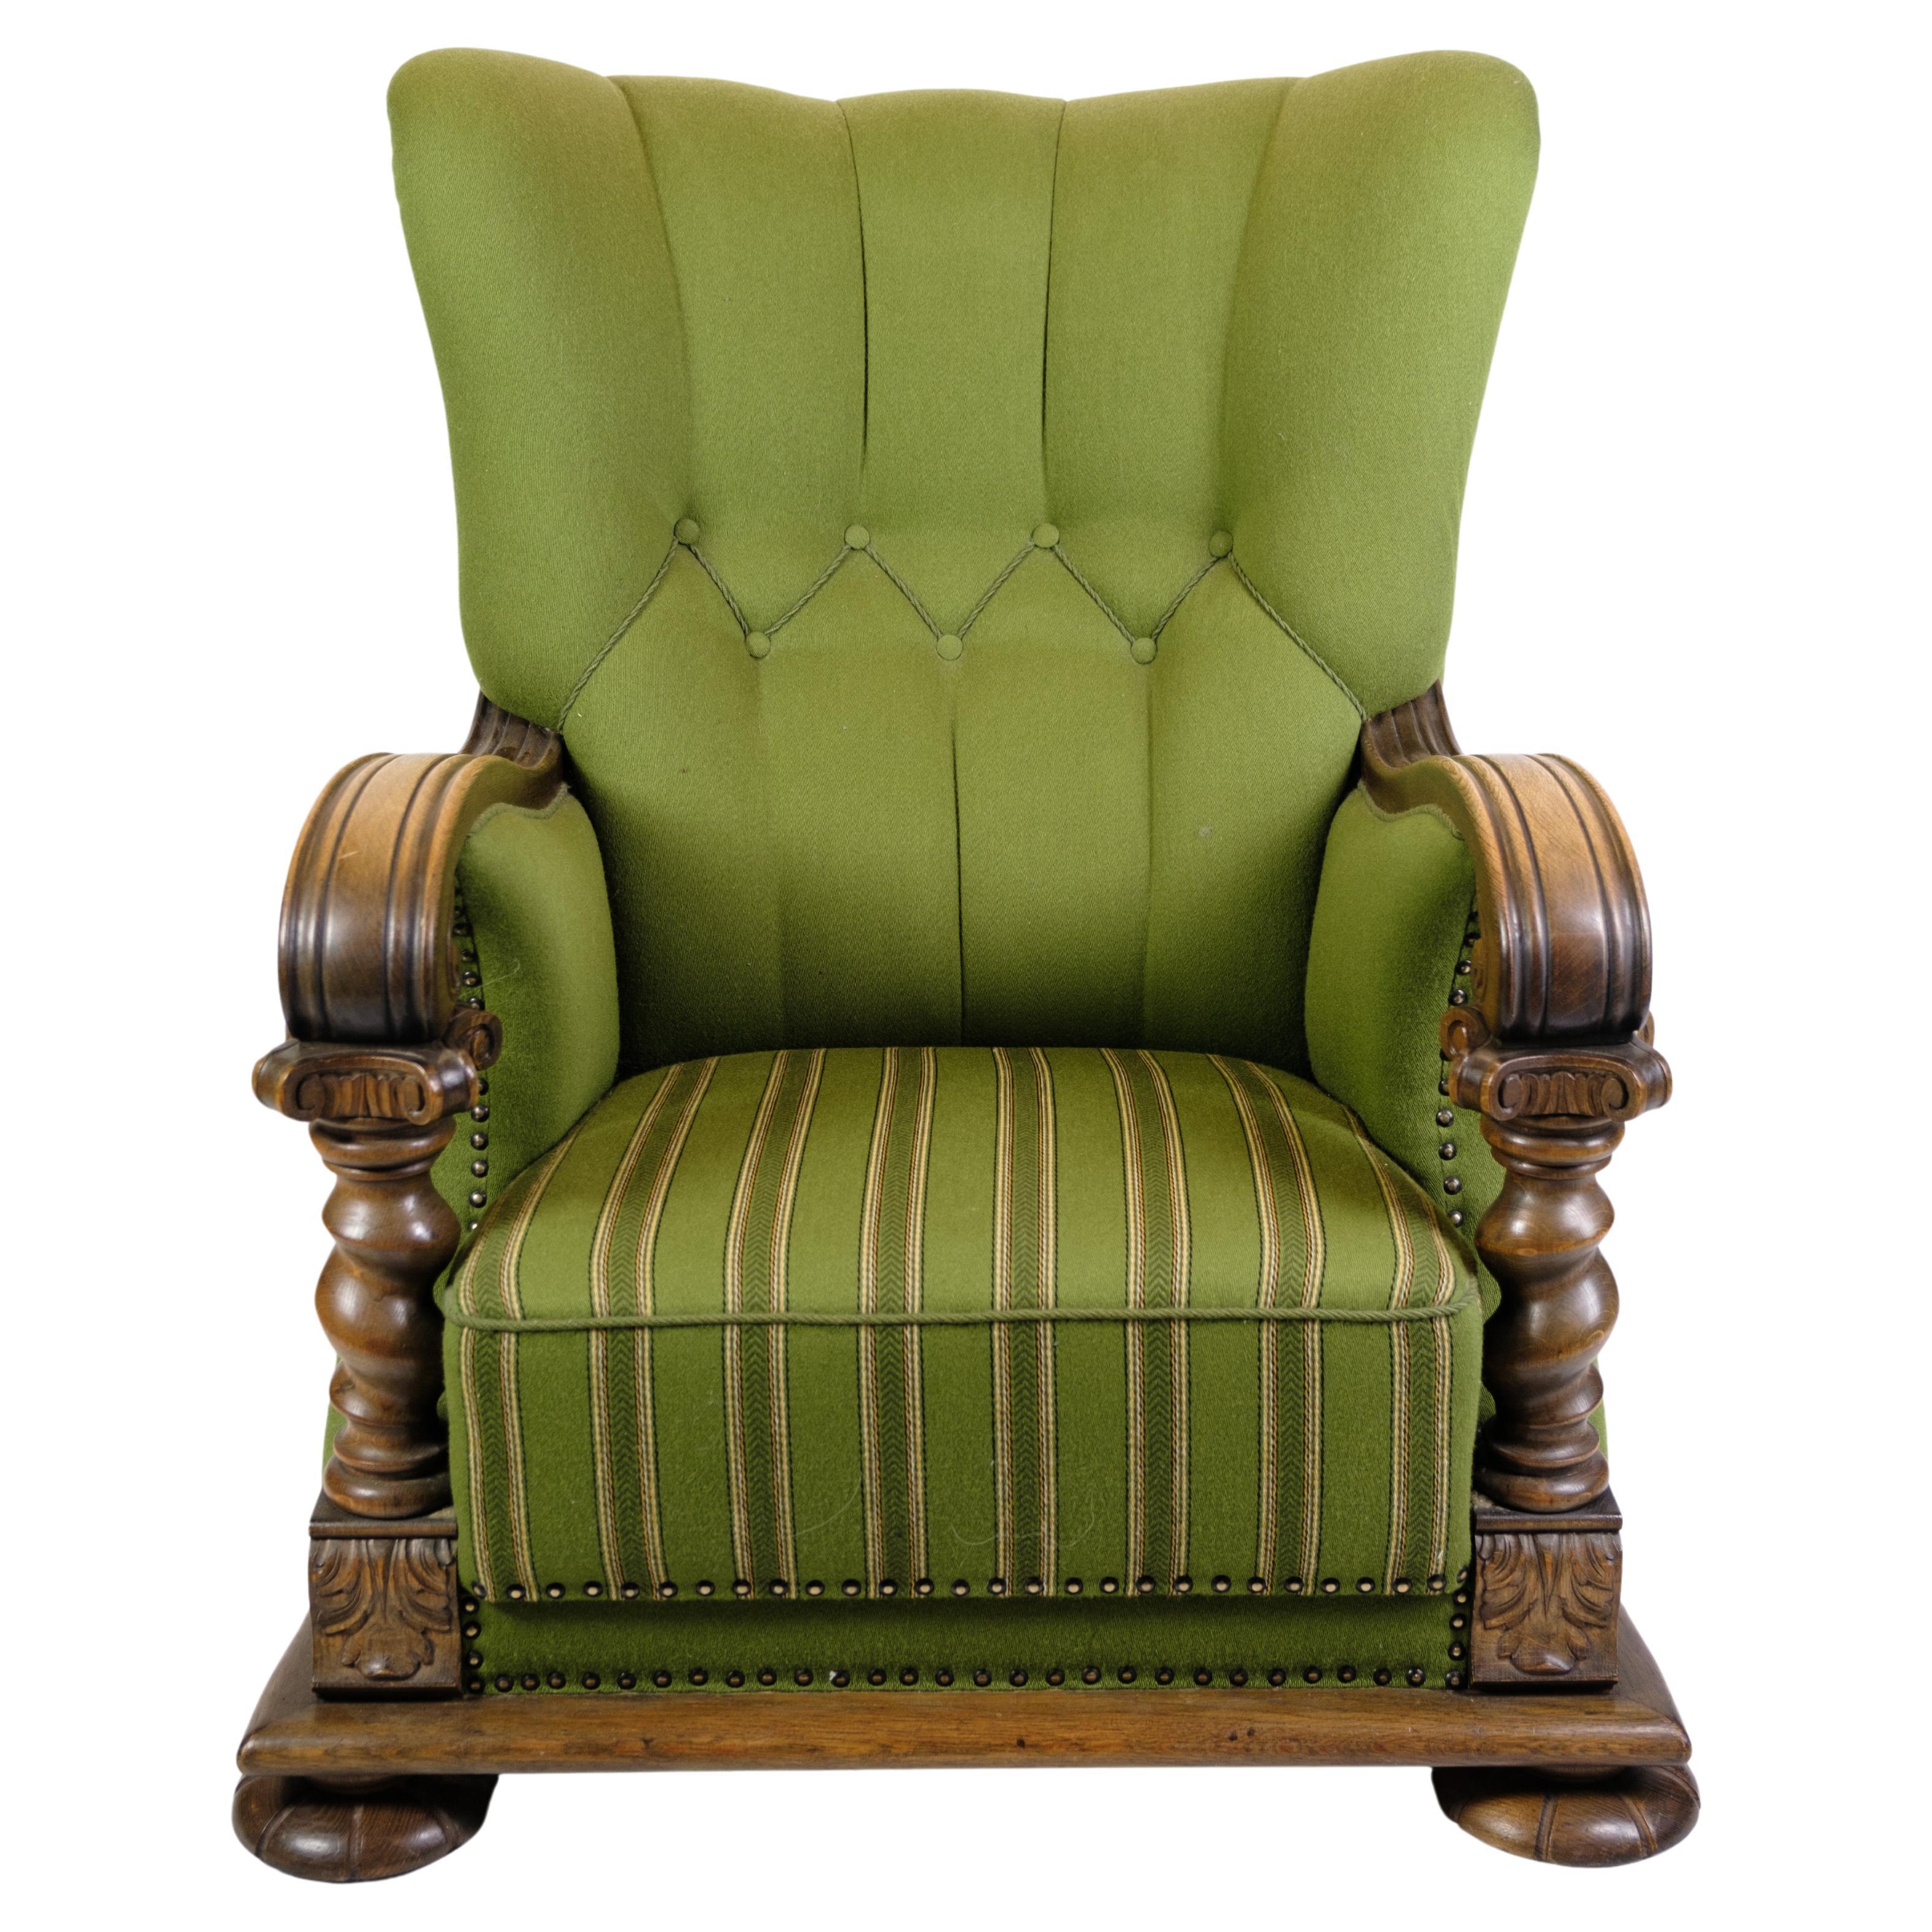 High-backed Armchair in Green fabric with Wood Carvings from 1920s.